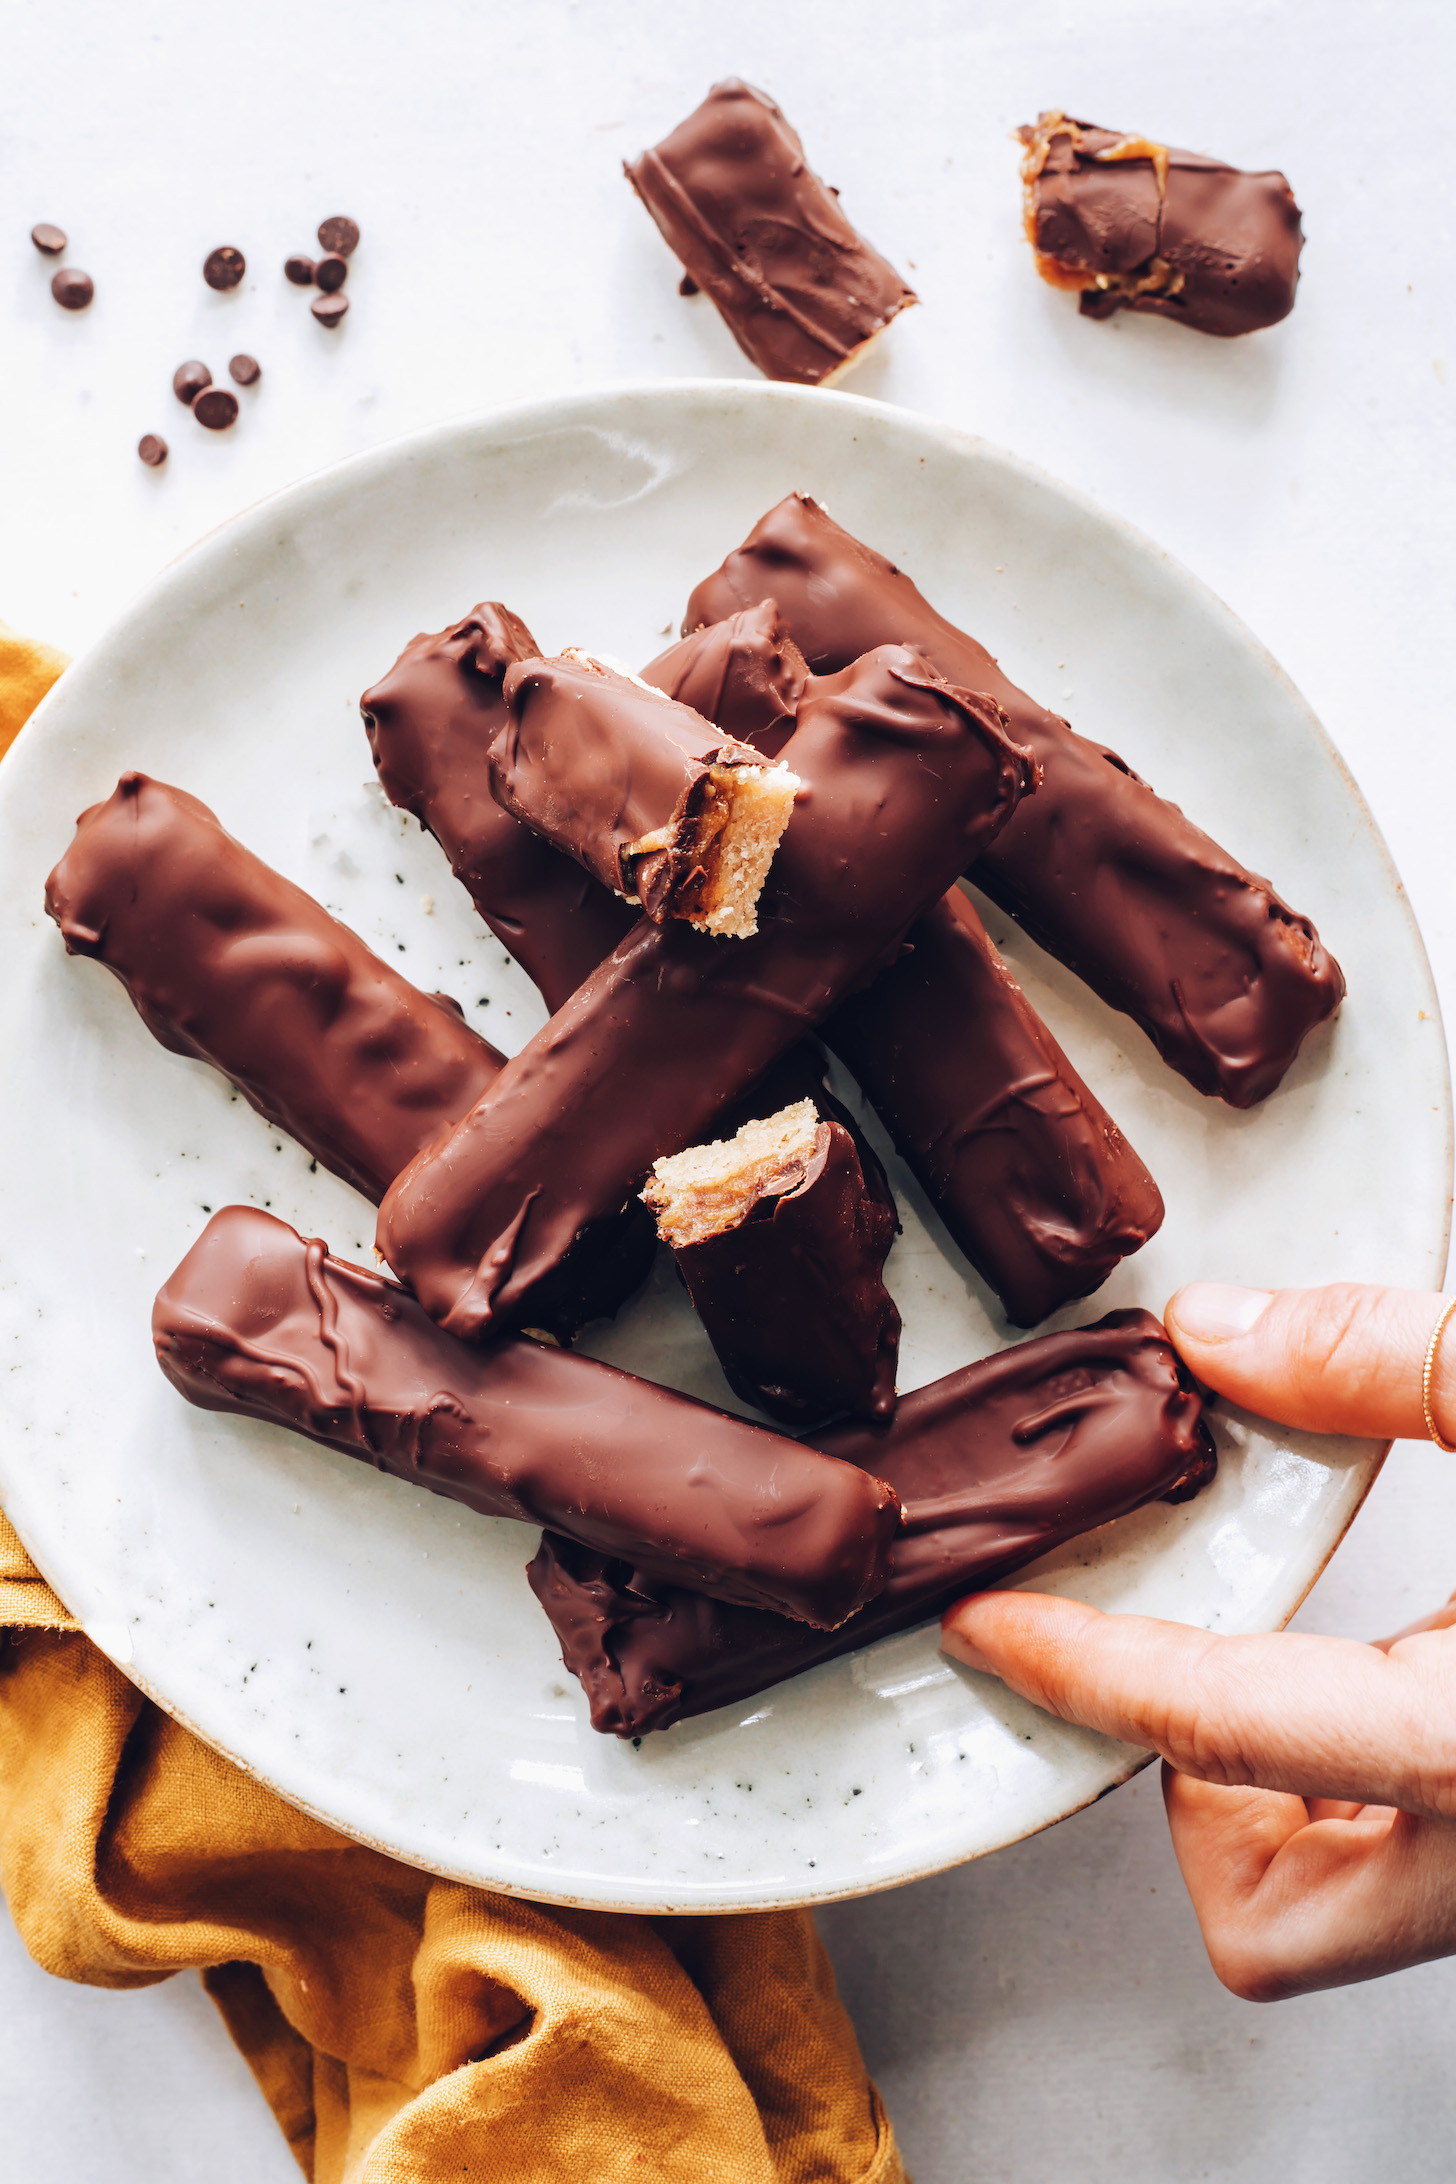 Plate of our easy homemade Twix bars recipe